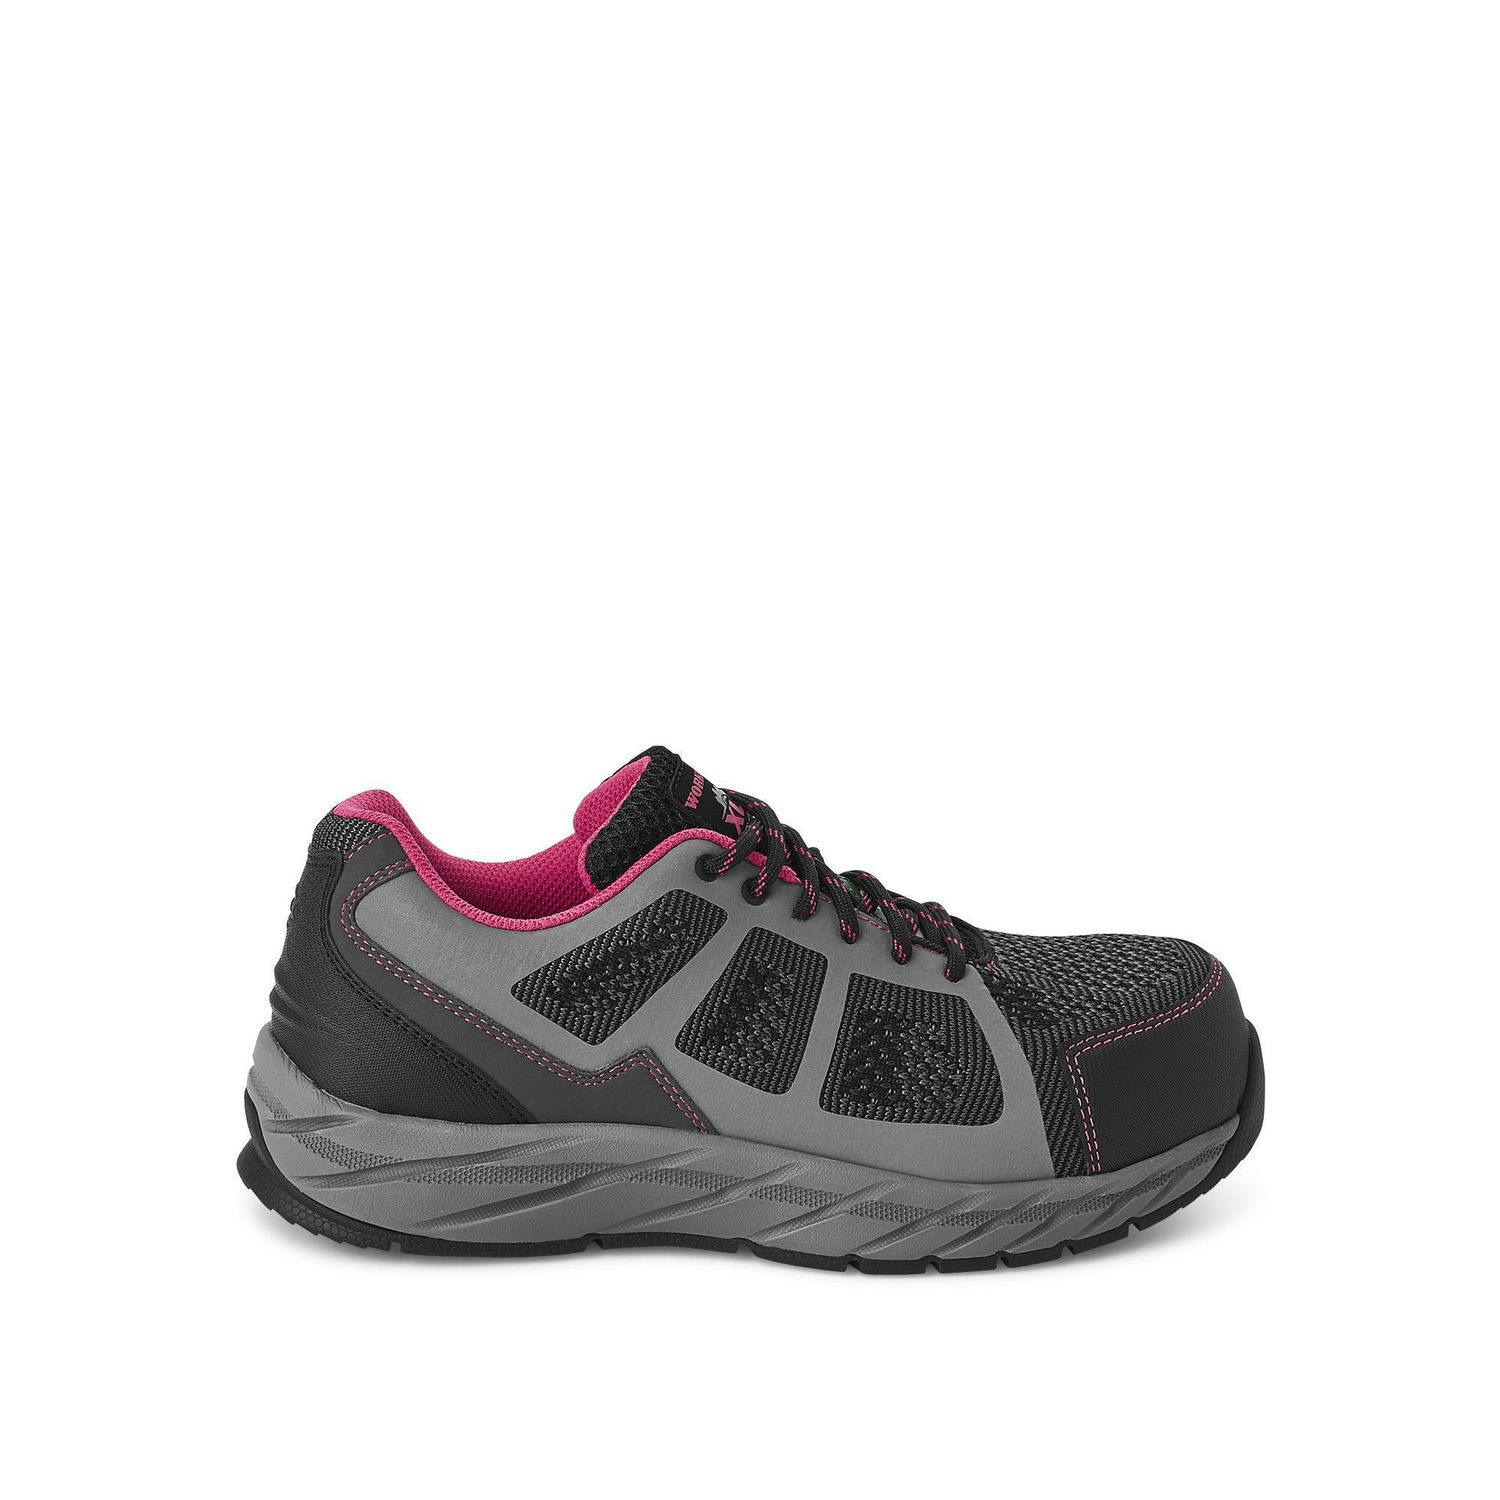 Workload Women's Falcon Safety Shoes | Walmart Canada